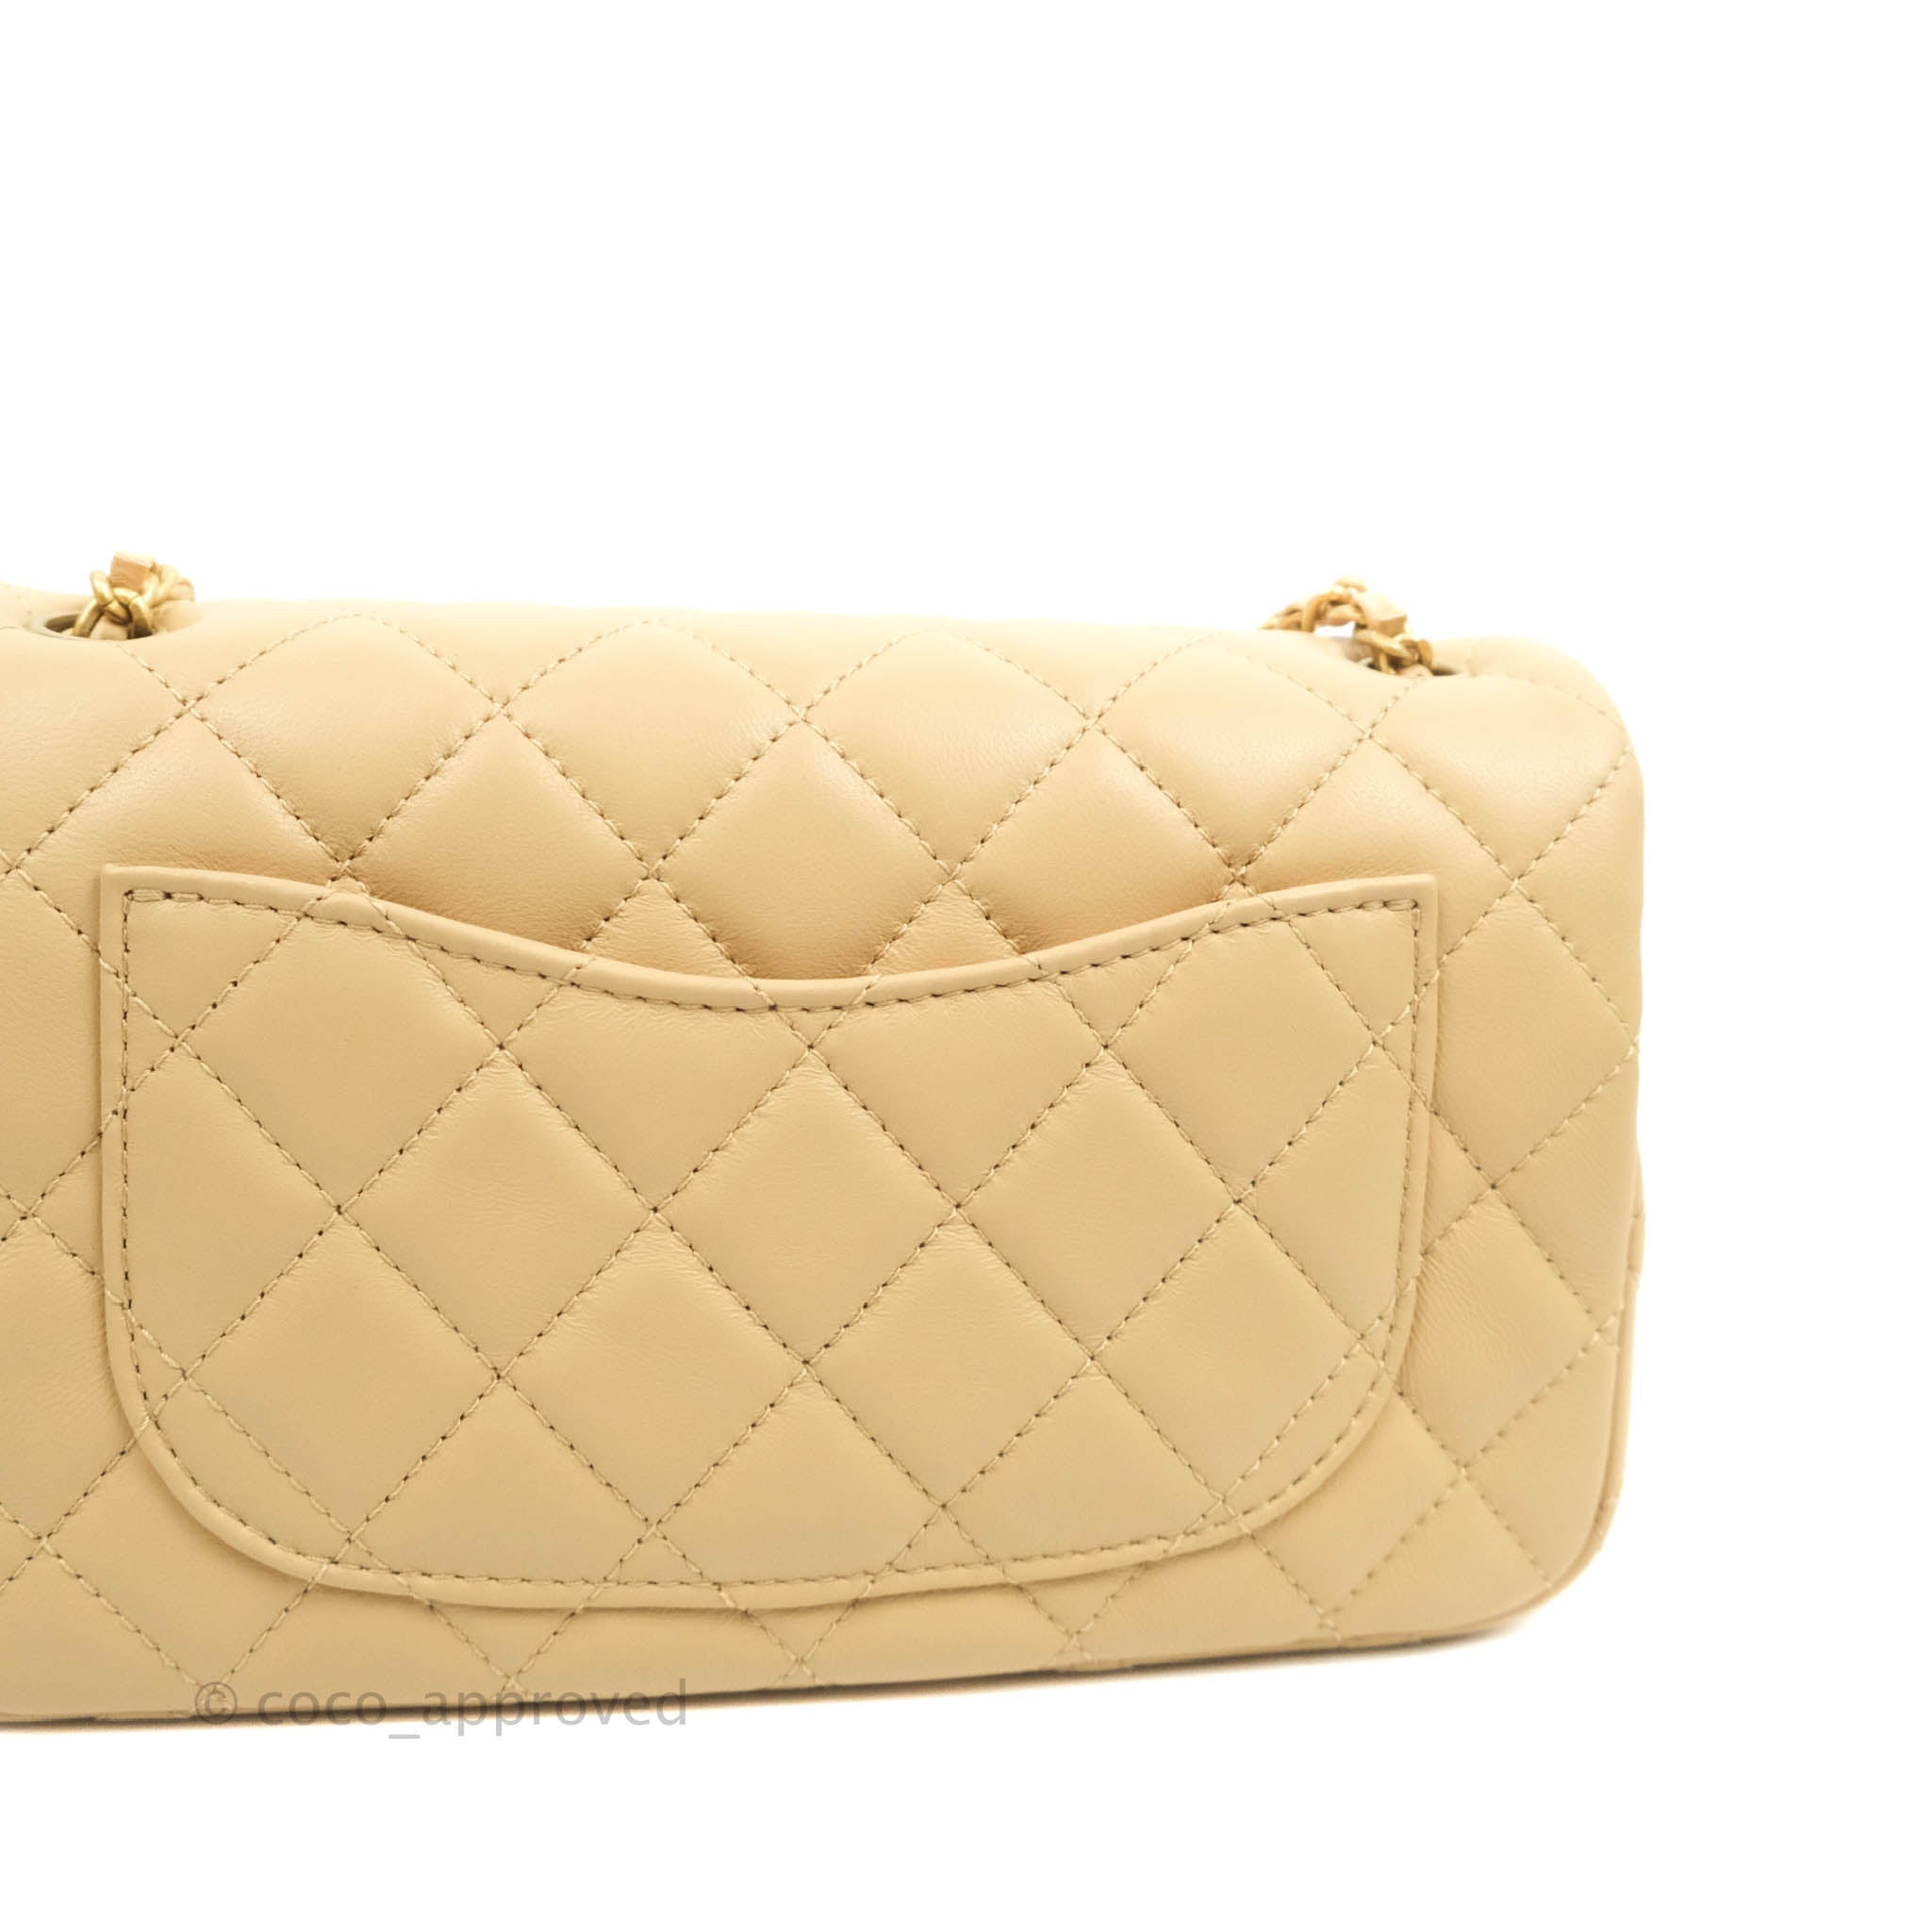 Chanel Yellow Quilted Satin Vintage Mini Flap Bag